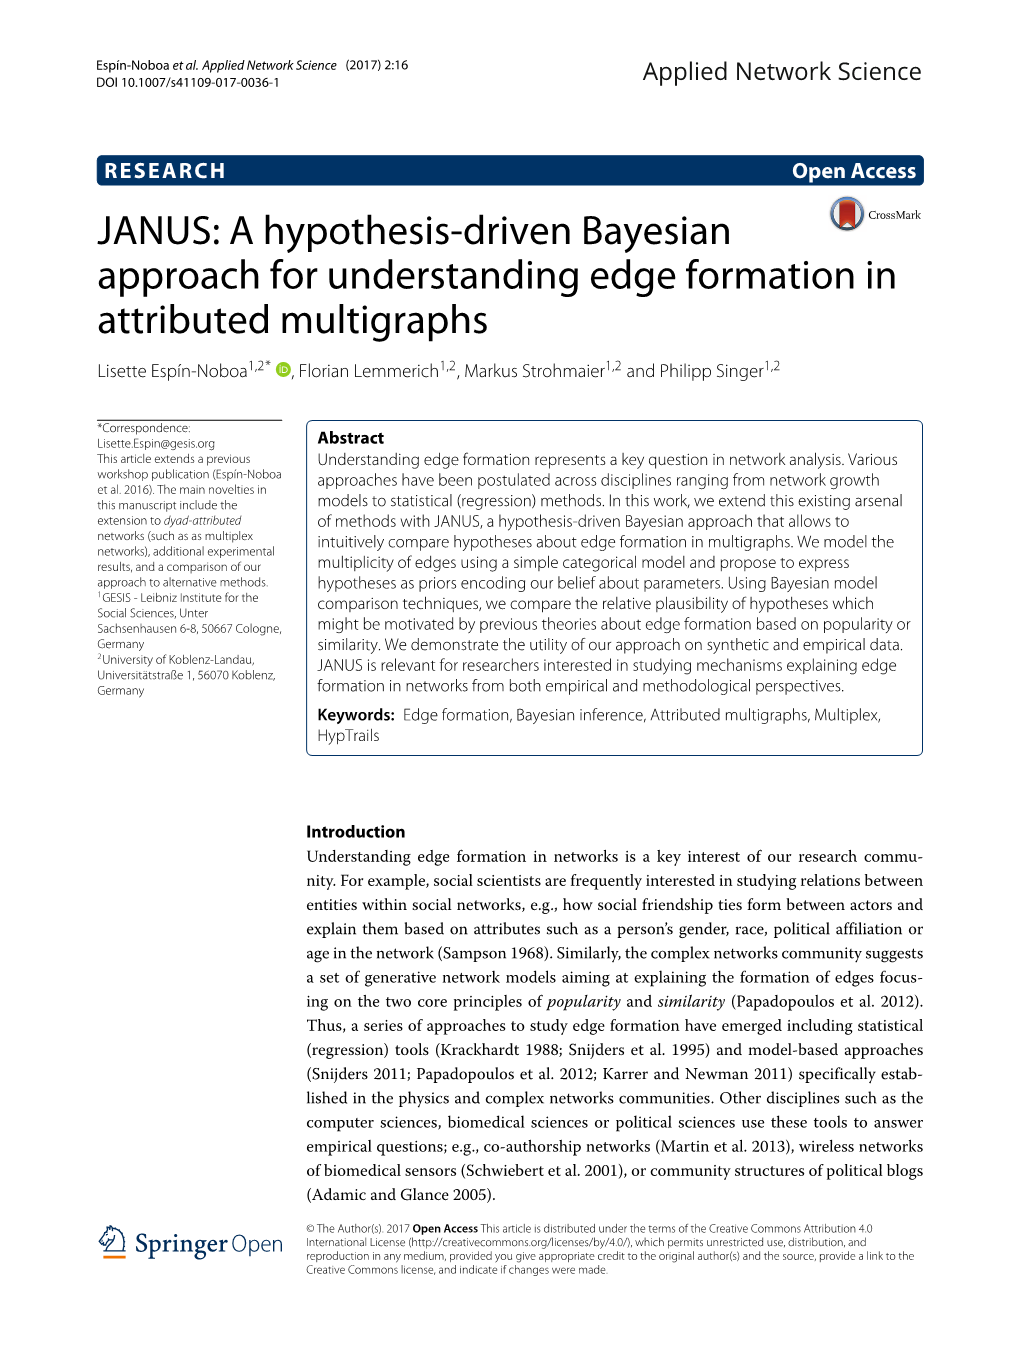 A Hypothesis-Driven Bayesian Approach for Understanding Edge Formation in Attributed Multigraphs